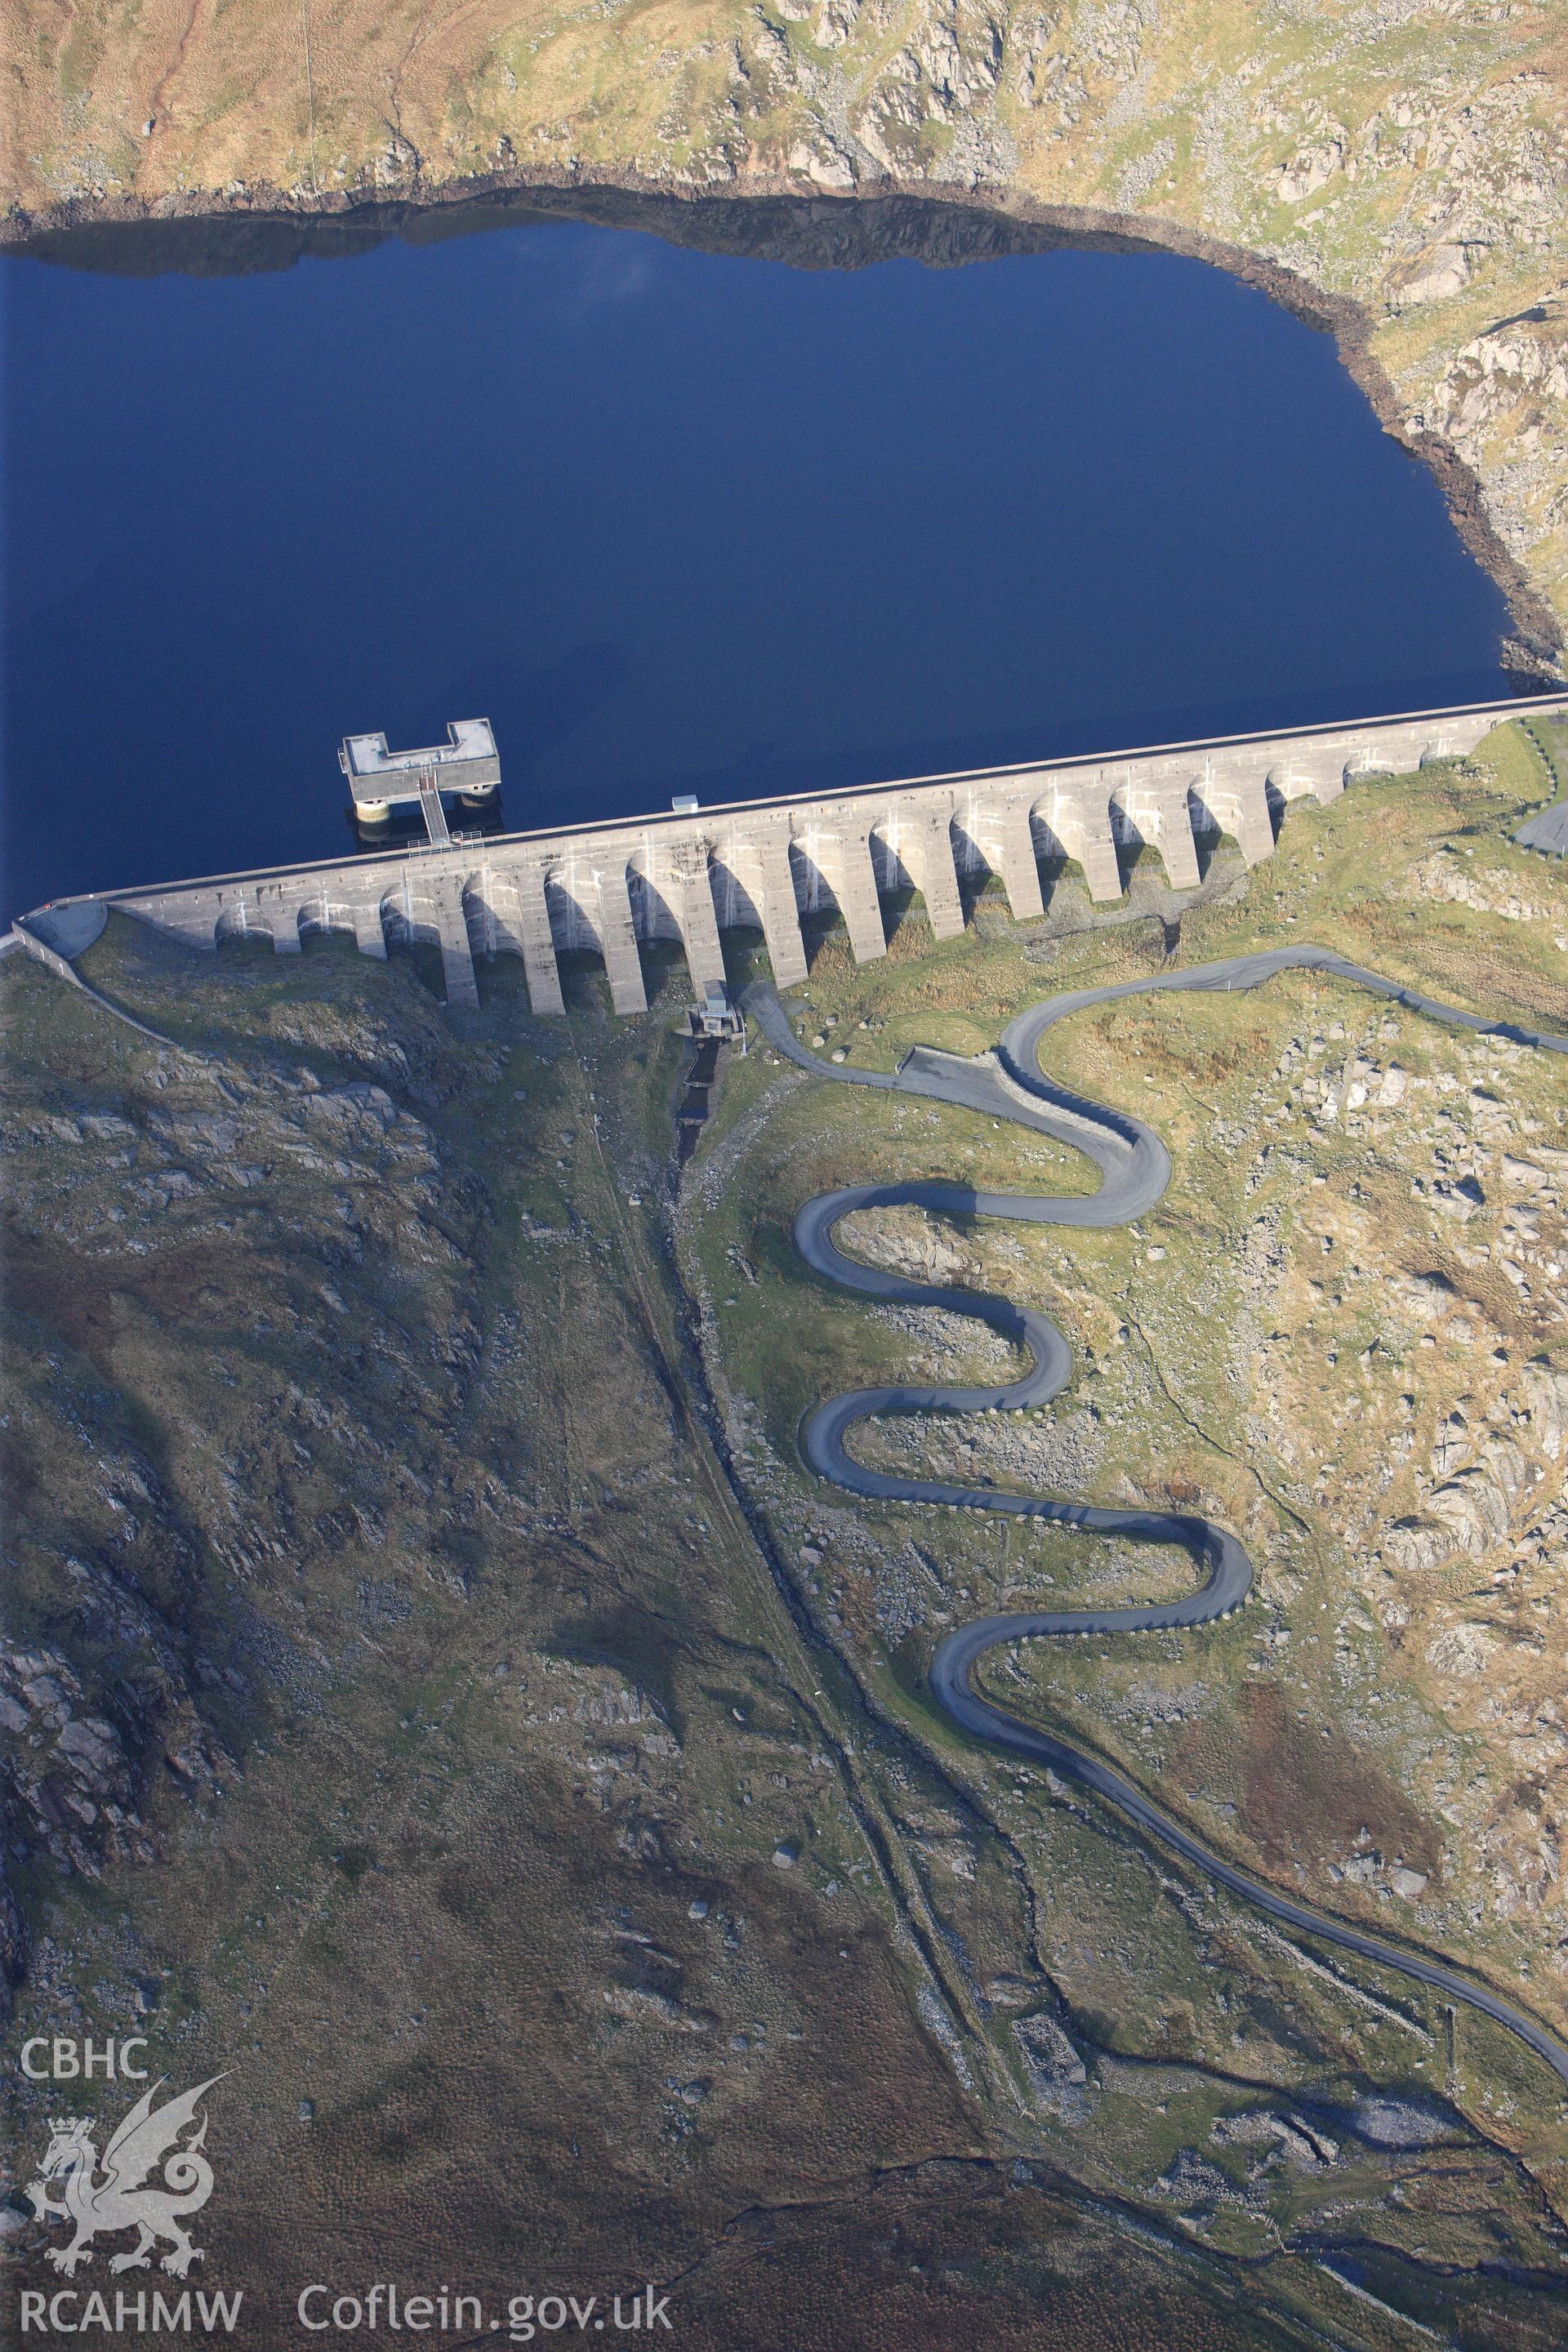 RCAHMW colour oblique photograph of Llyn Stwlan reservoir. Taken by Toby Driver on 13/01/2012.